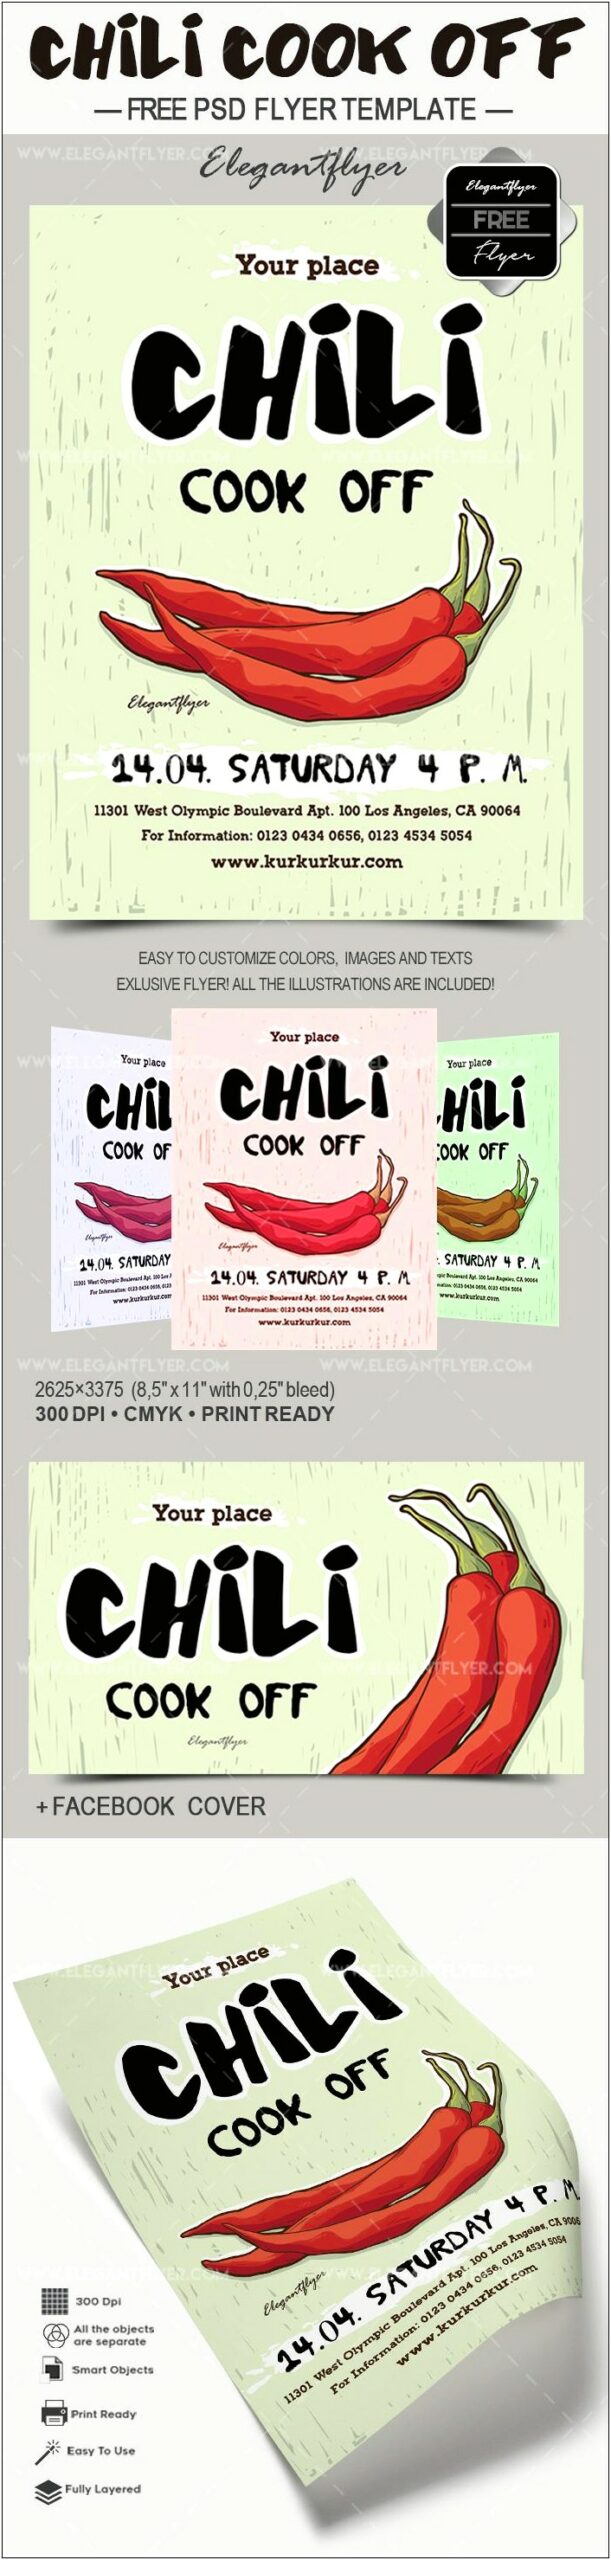 Free Photoshop Chili Cook Off Flyer Template